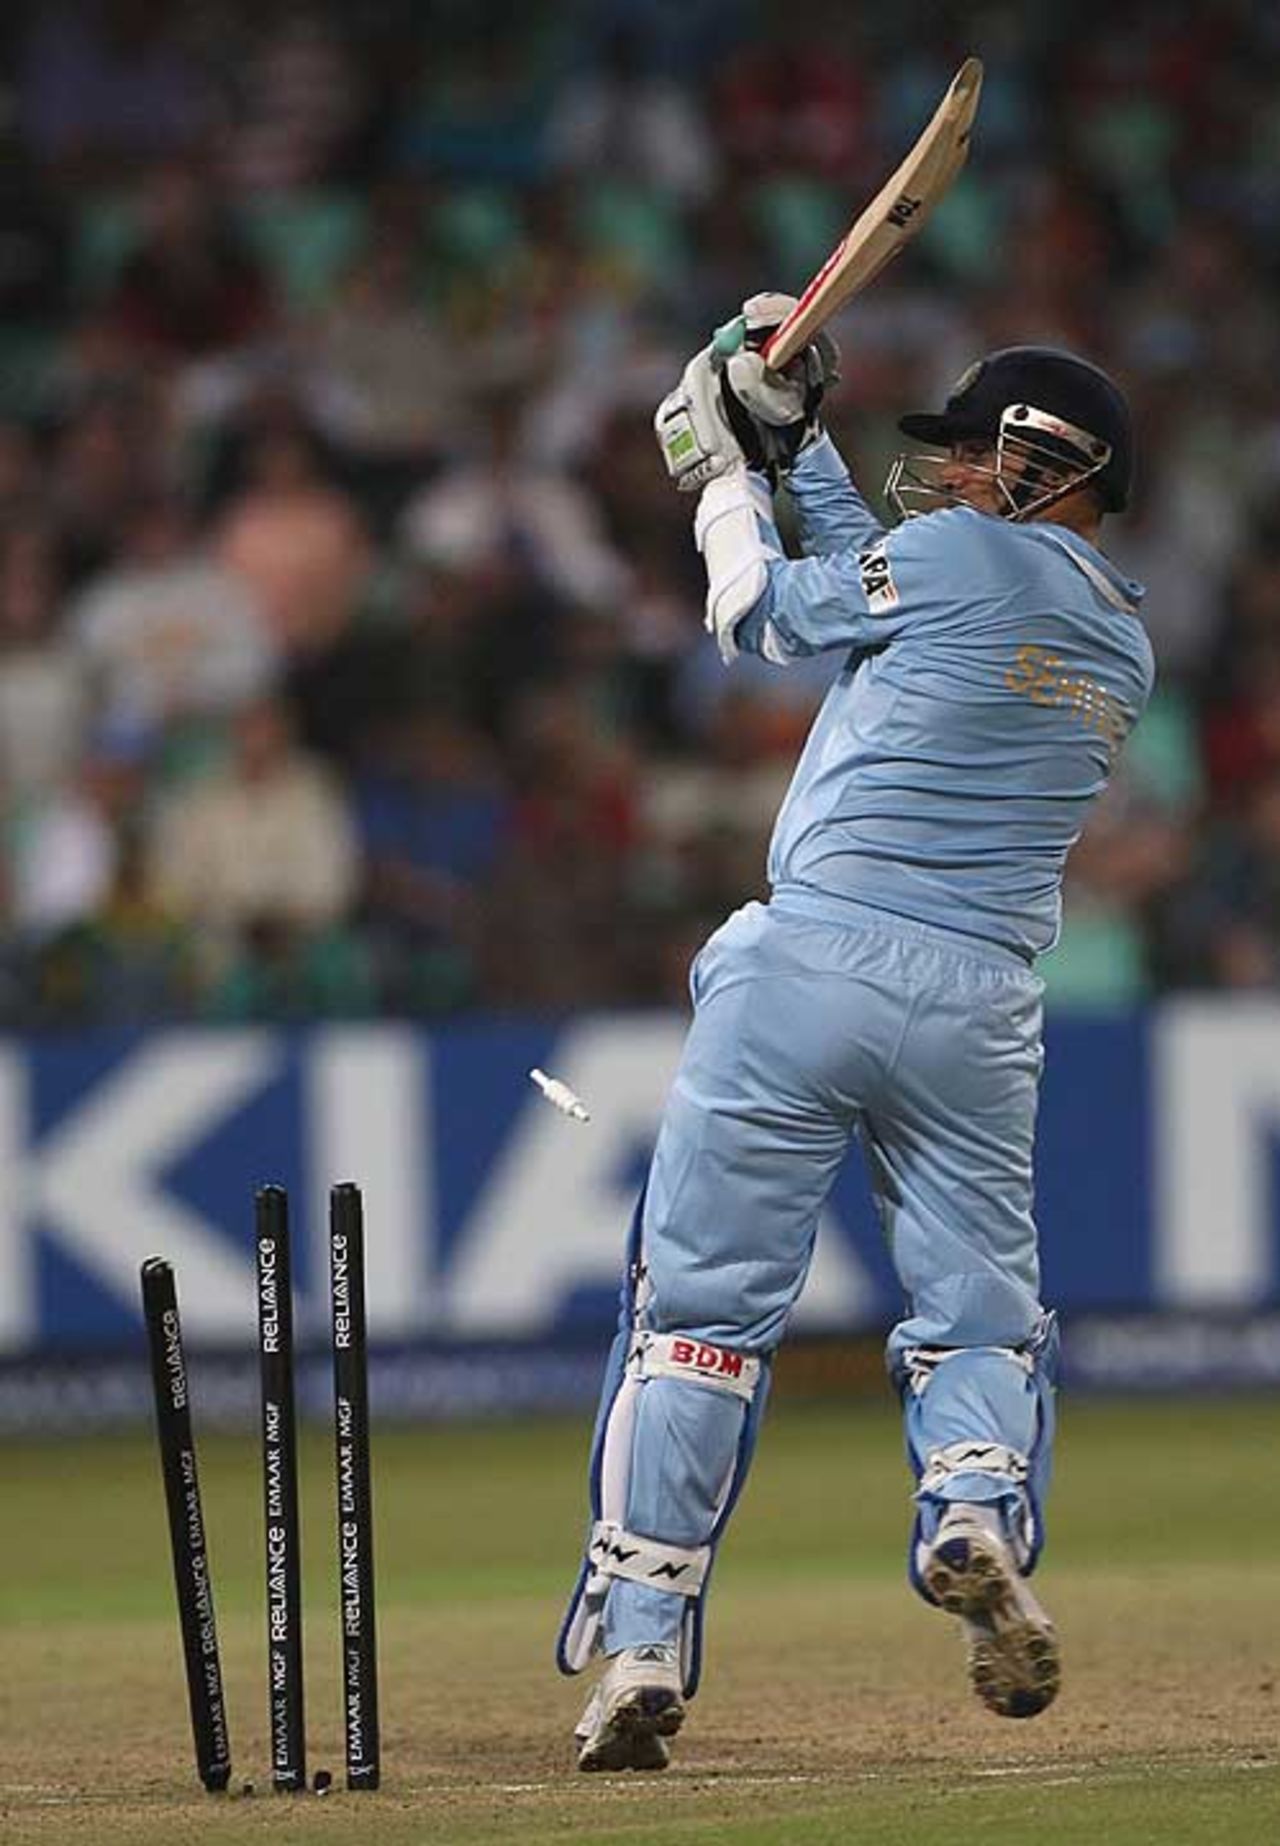 Virender Sehwag hits across the line and loses his leg stump, England v India, Group E, ICC World Twenty20, Durban, September 19, 2007